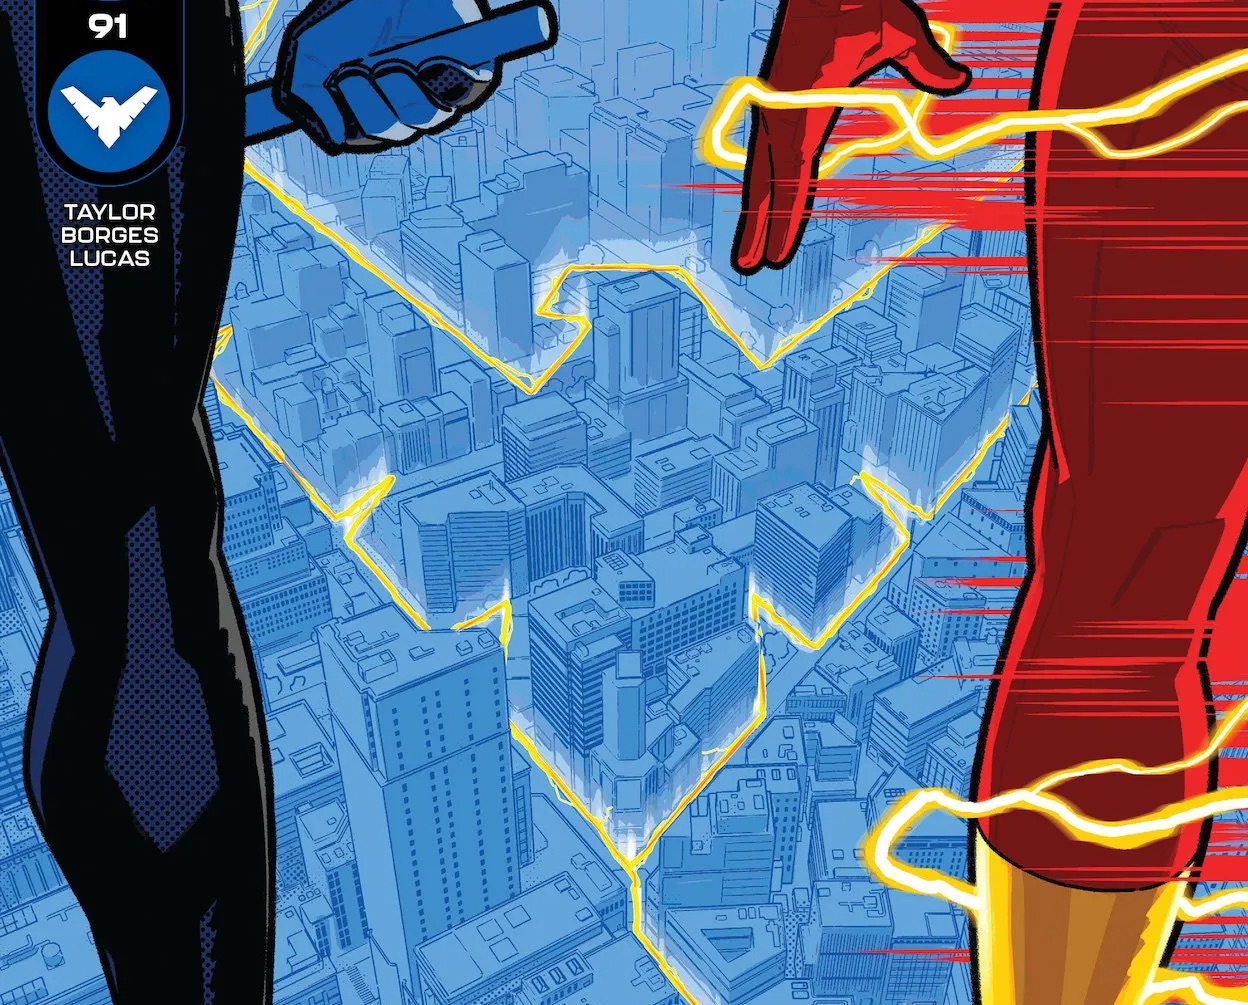 'Nightwing' #91 will make you want a Super-Friends comic